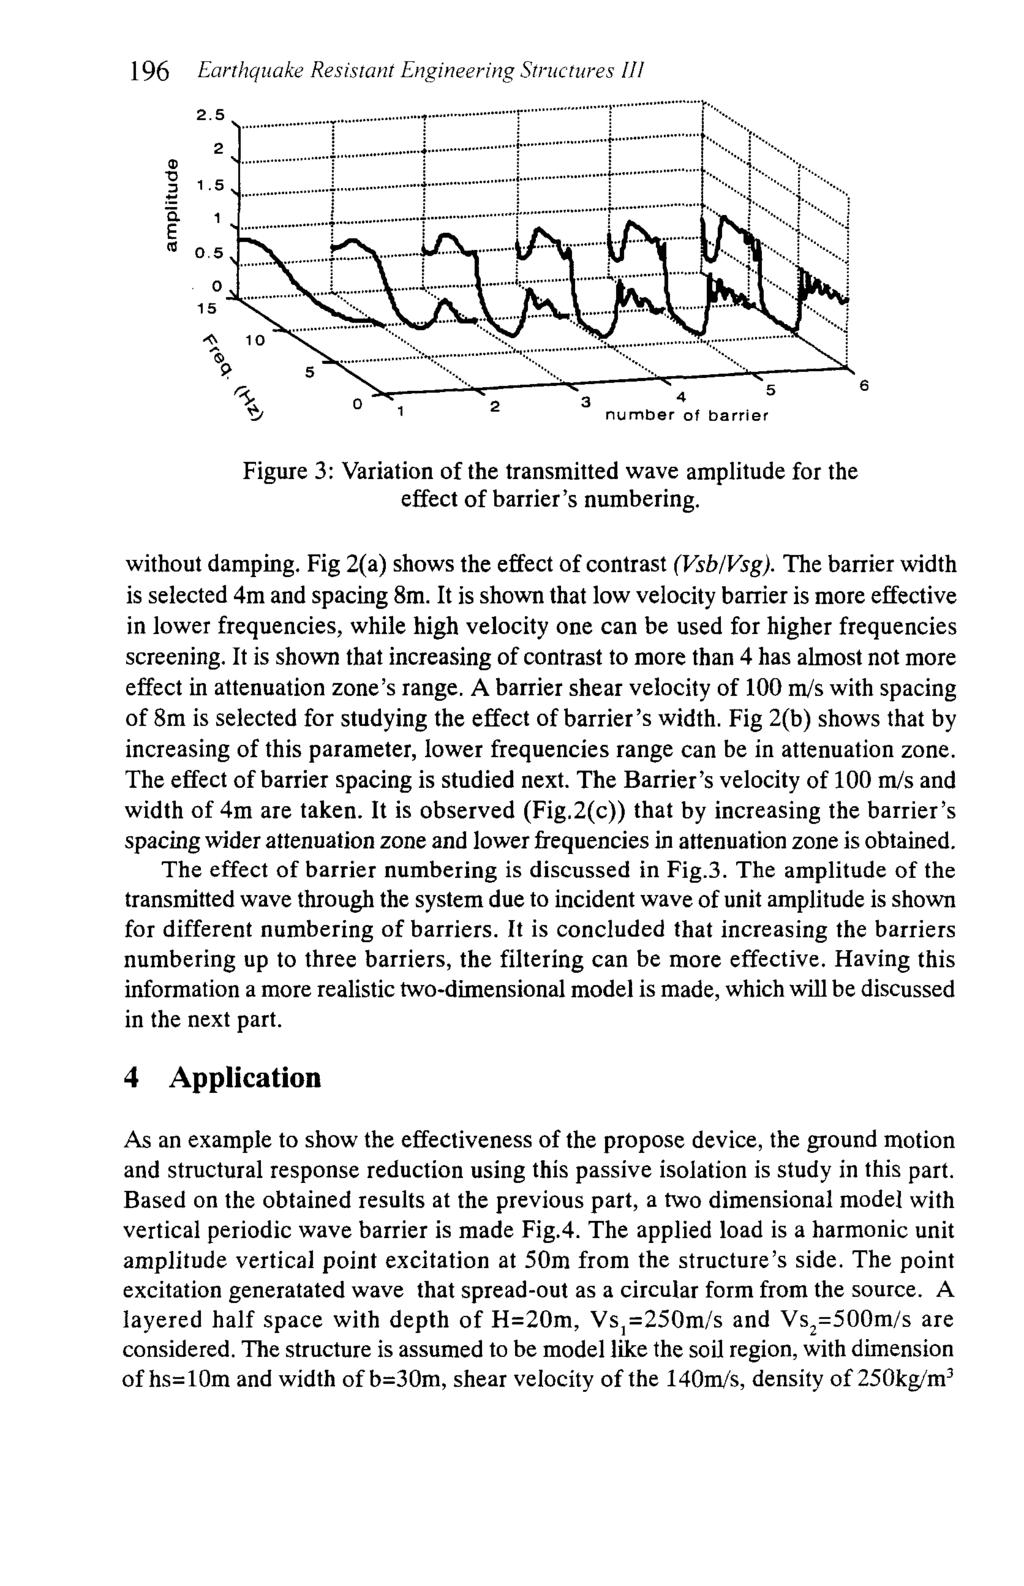 Earthquake Resistant Engineering Stlwttires 111.. 4. 1 2 3 number of barrier Figure 3: Variation of the transmitted wave amplitude for the effect of barrier's numbering. without damping.